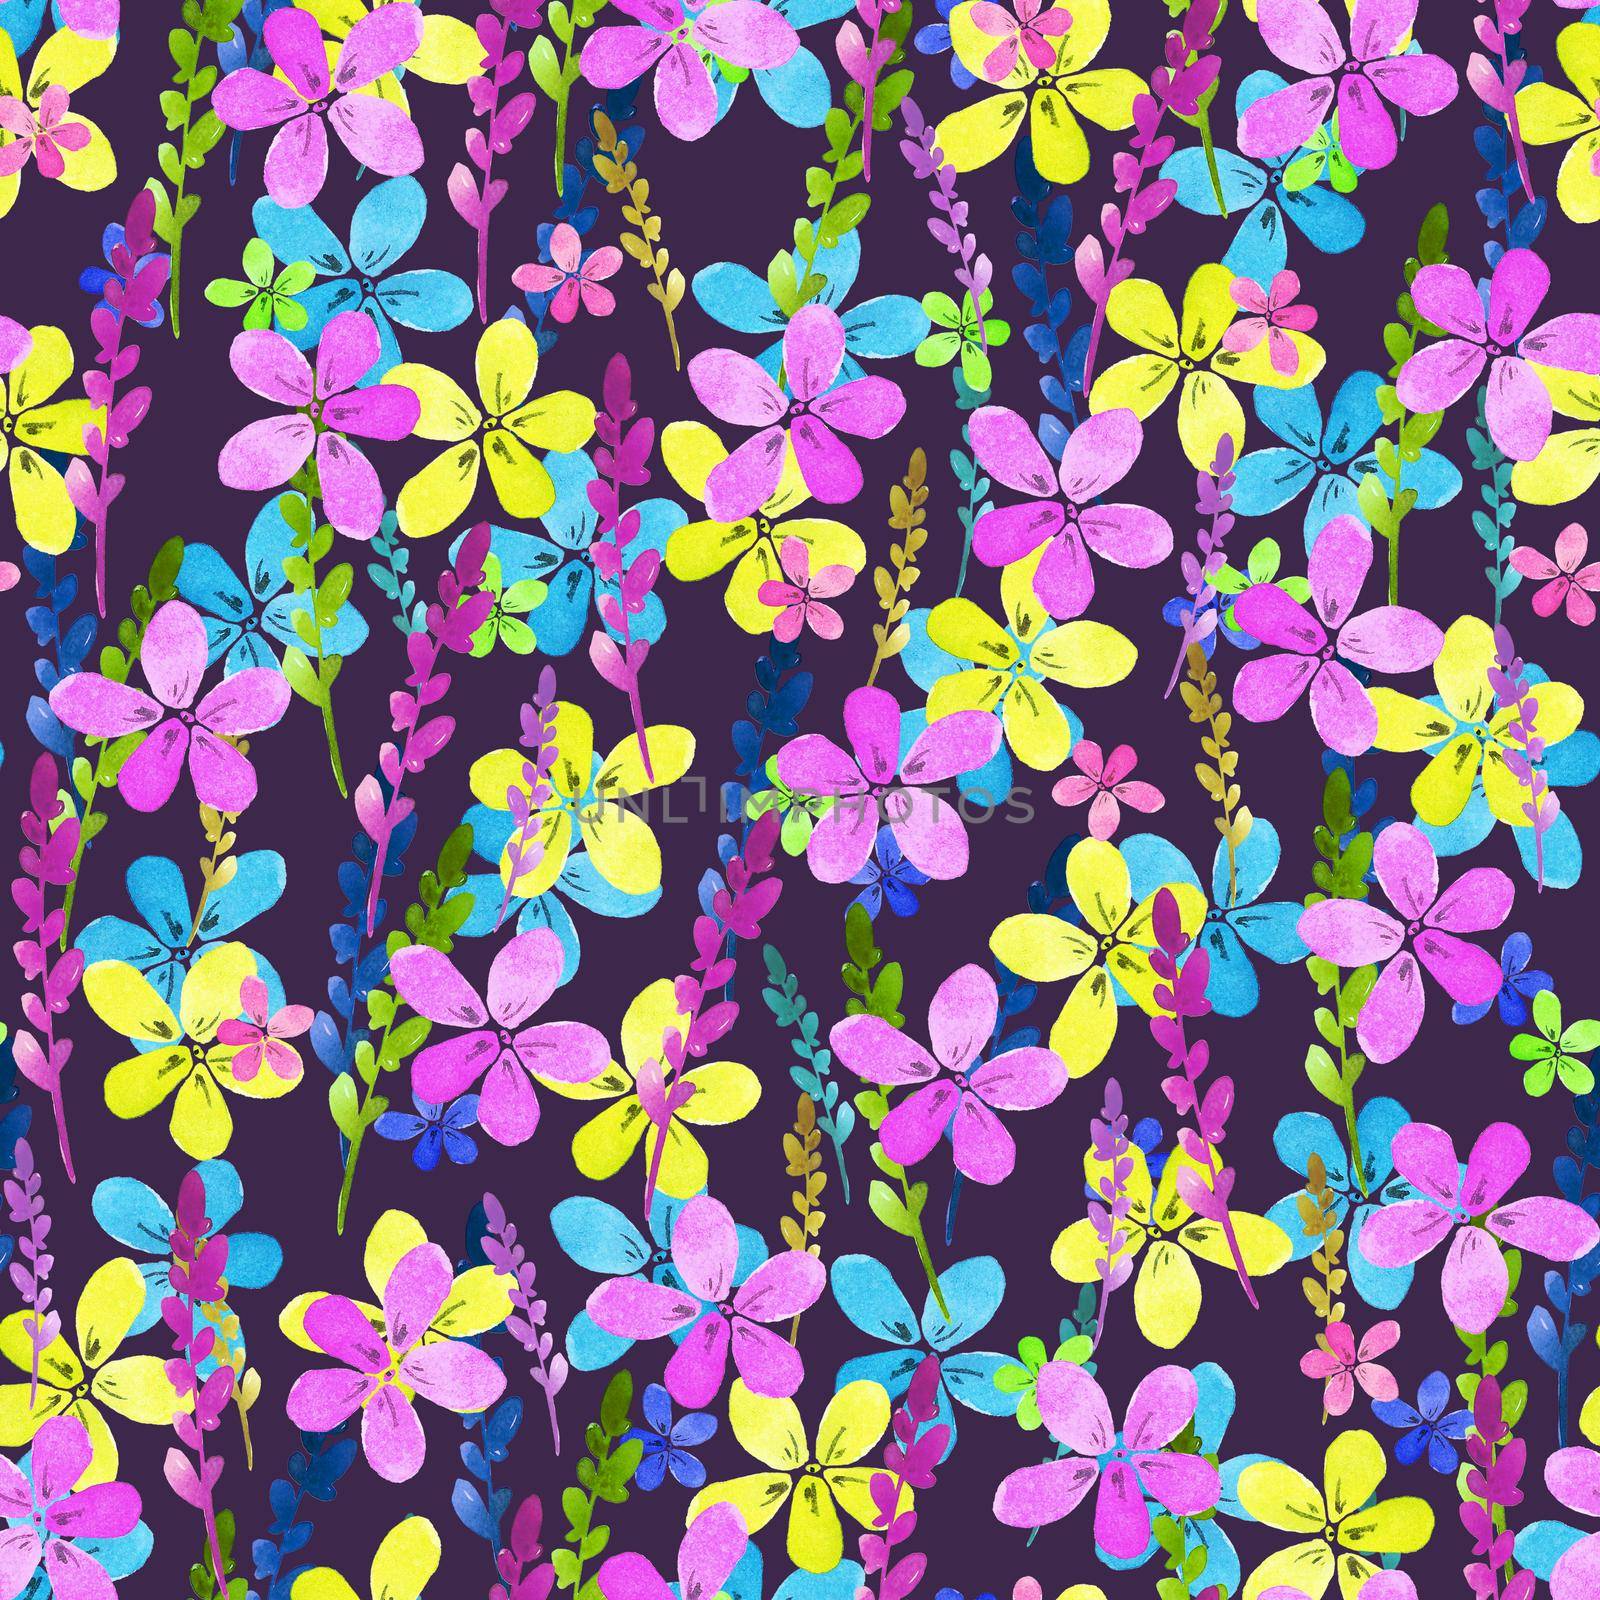 Seamless floral pattern with watercolor blue pink yellow flowers and leaves in vintage style on violet background. . Hand made. Ornate for textile, fabric. Nature illustration. Painting elements. by DesignAB